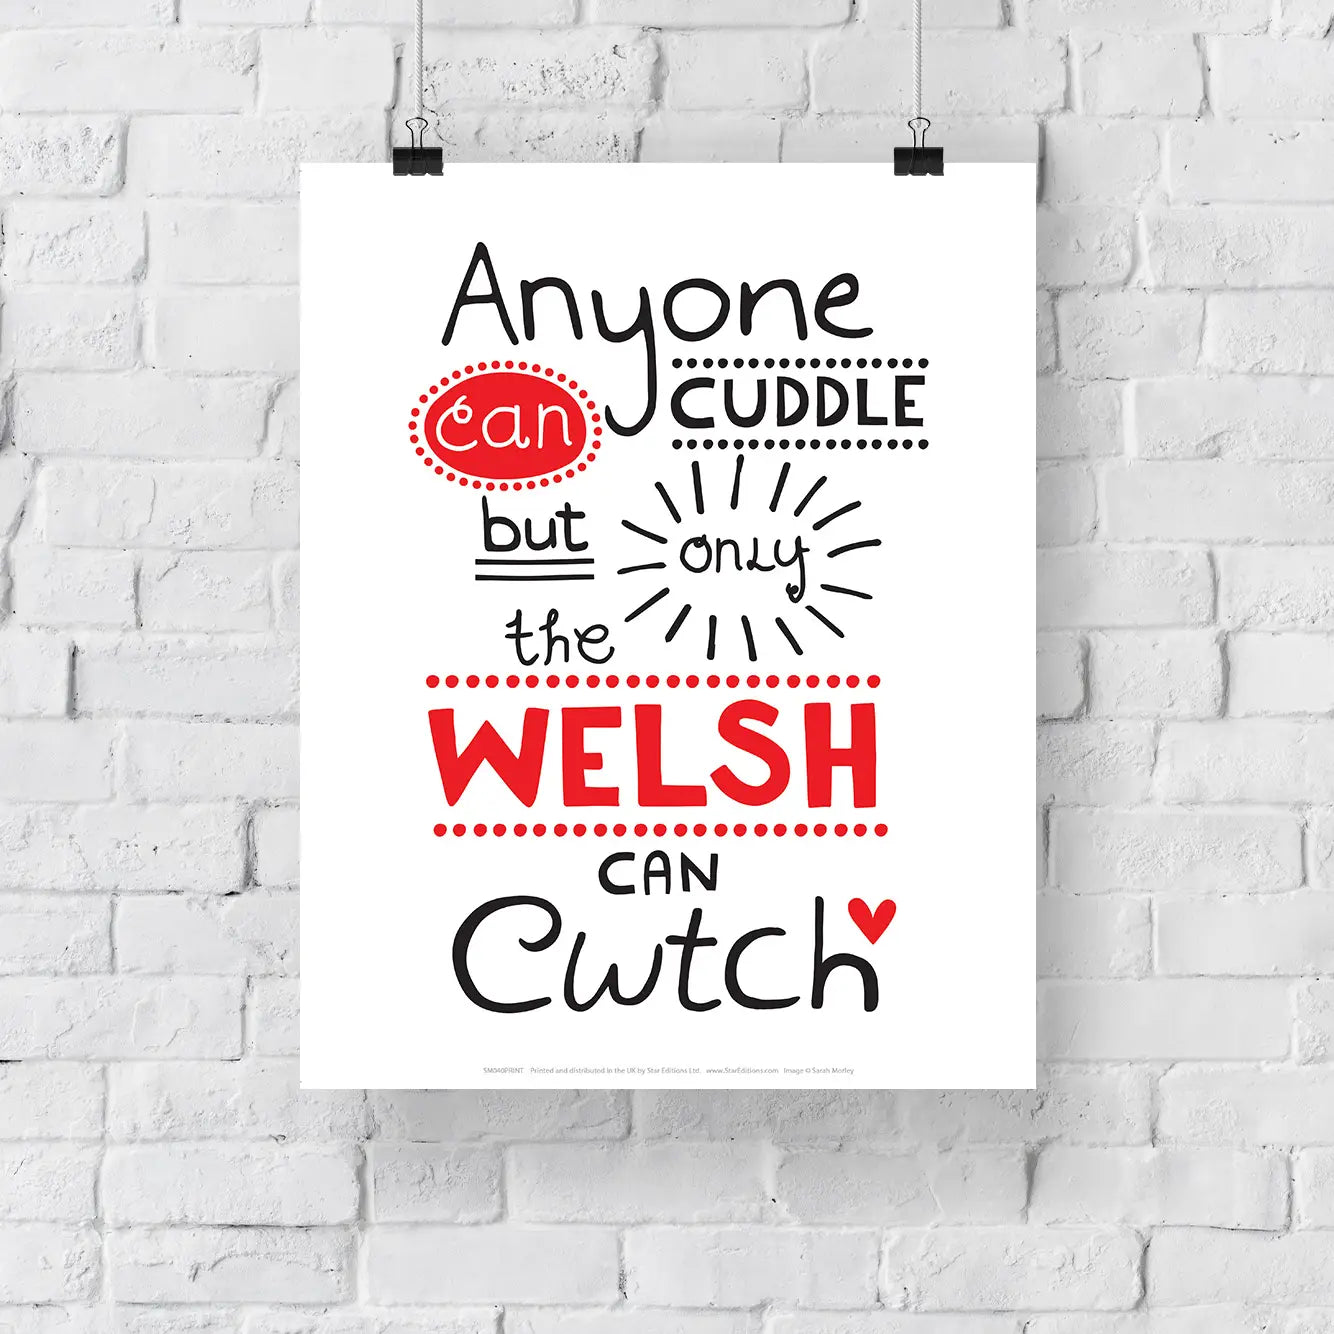 Only The Welsh Can Cwtch Art Print